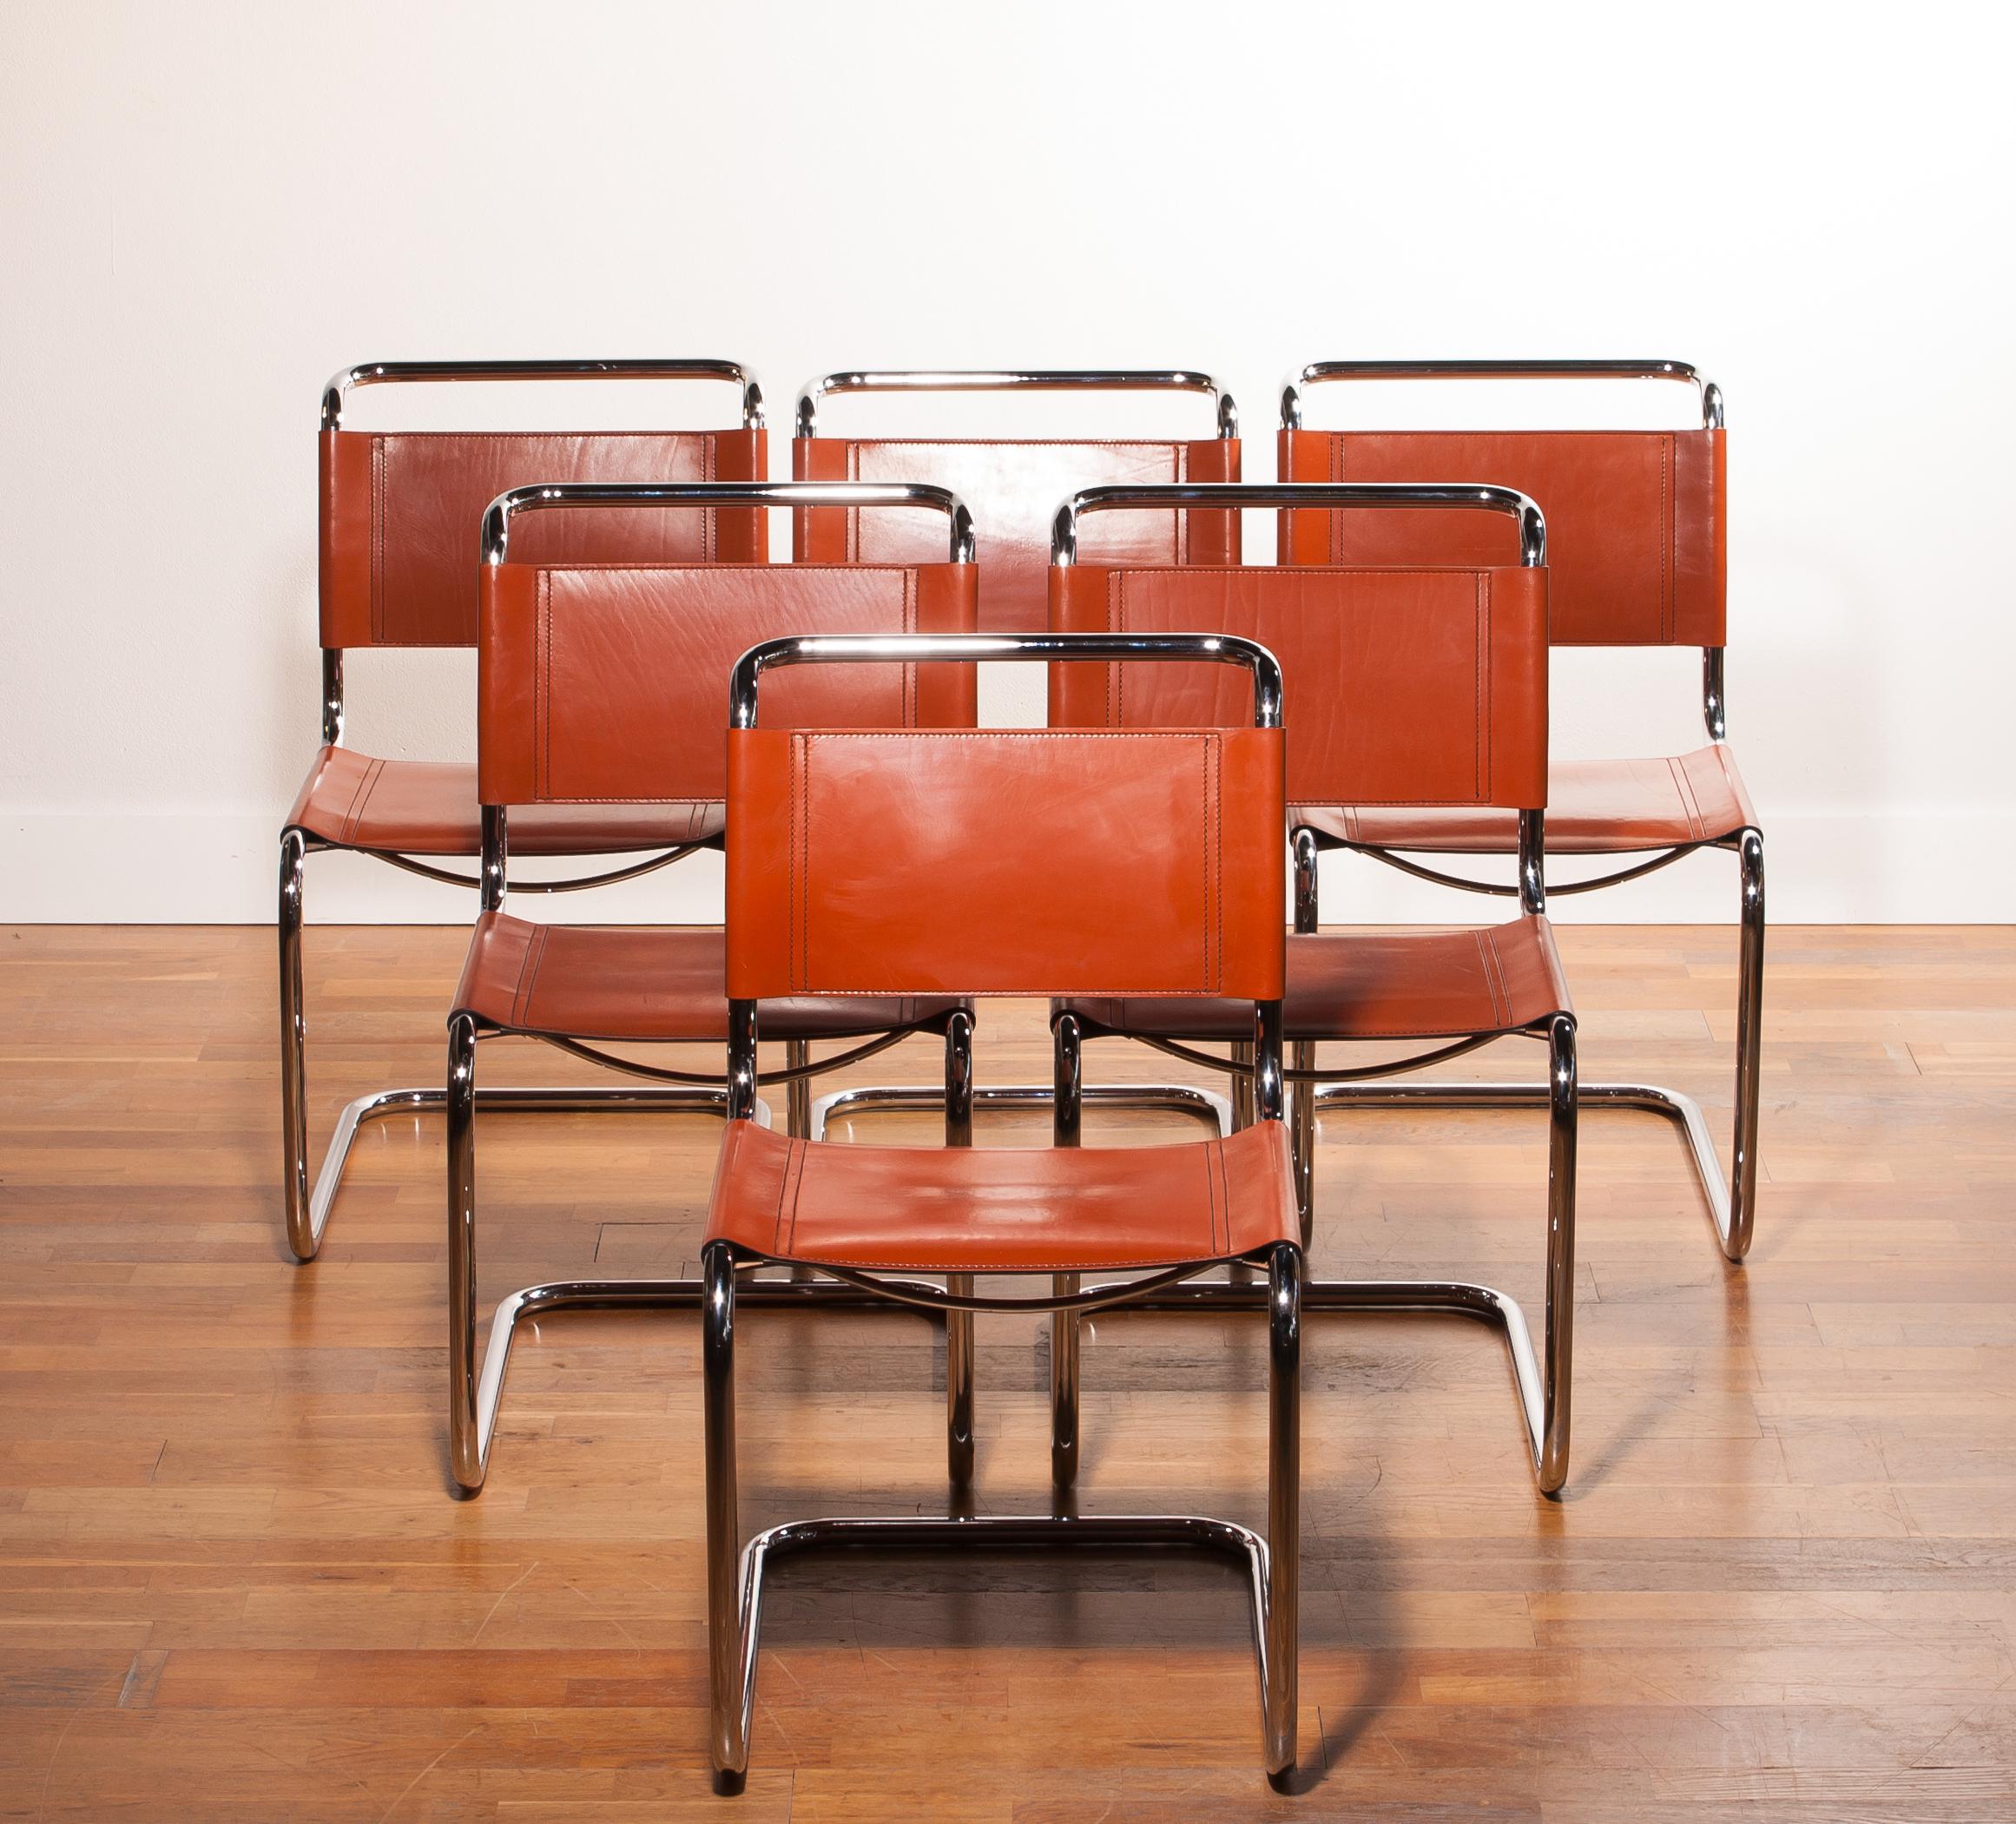 Italian Chrome Set of Six Tubular Dining Chairs by Mart Stam for Fasem in Cognac Leather